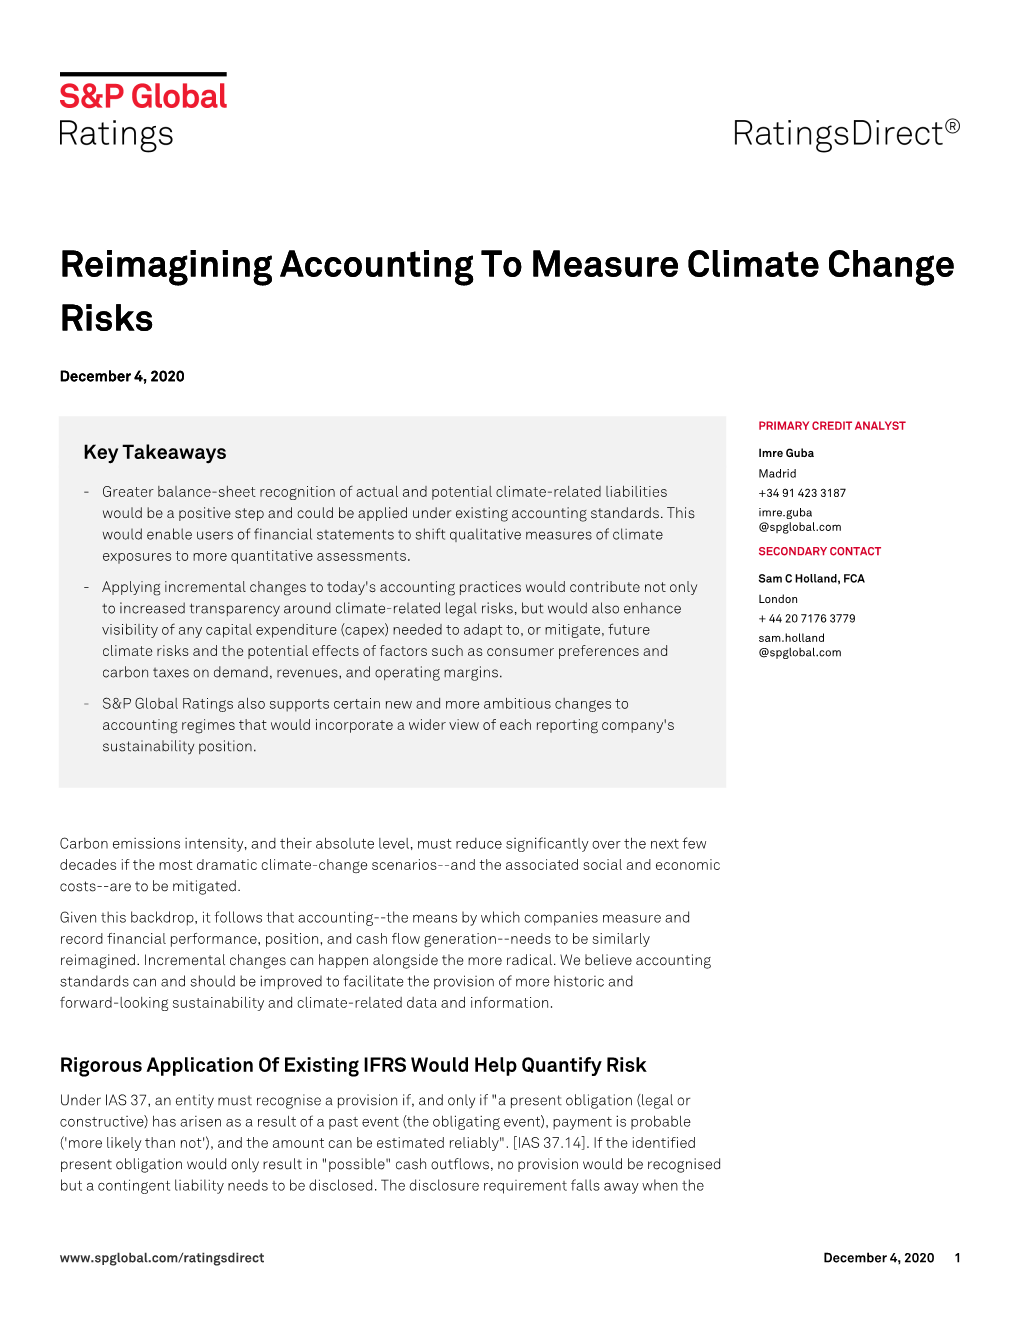 Reimagining Accounting to Measure Climate Change Risks